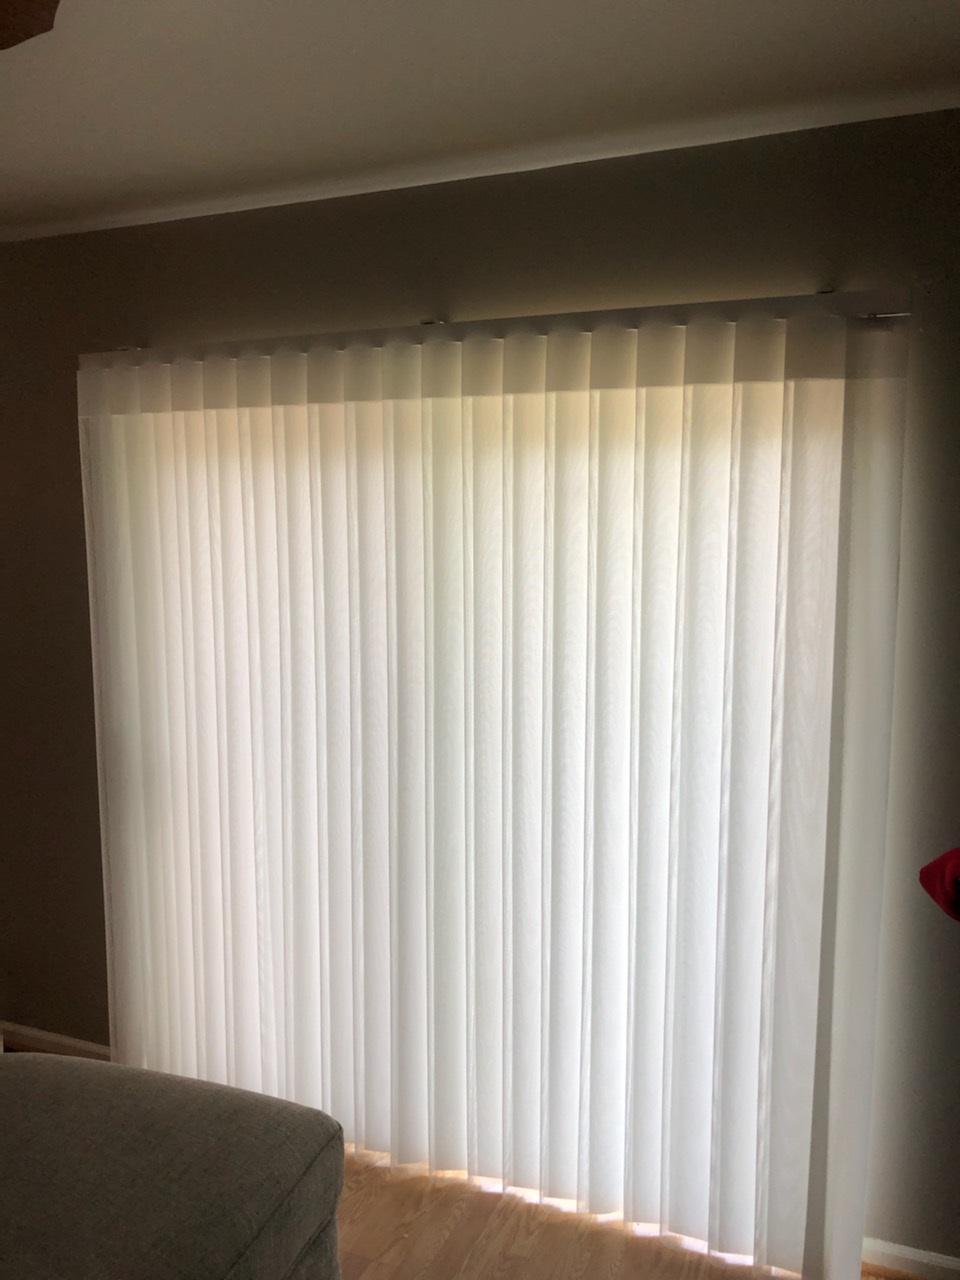 Smart Drape from a Chester installation!